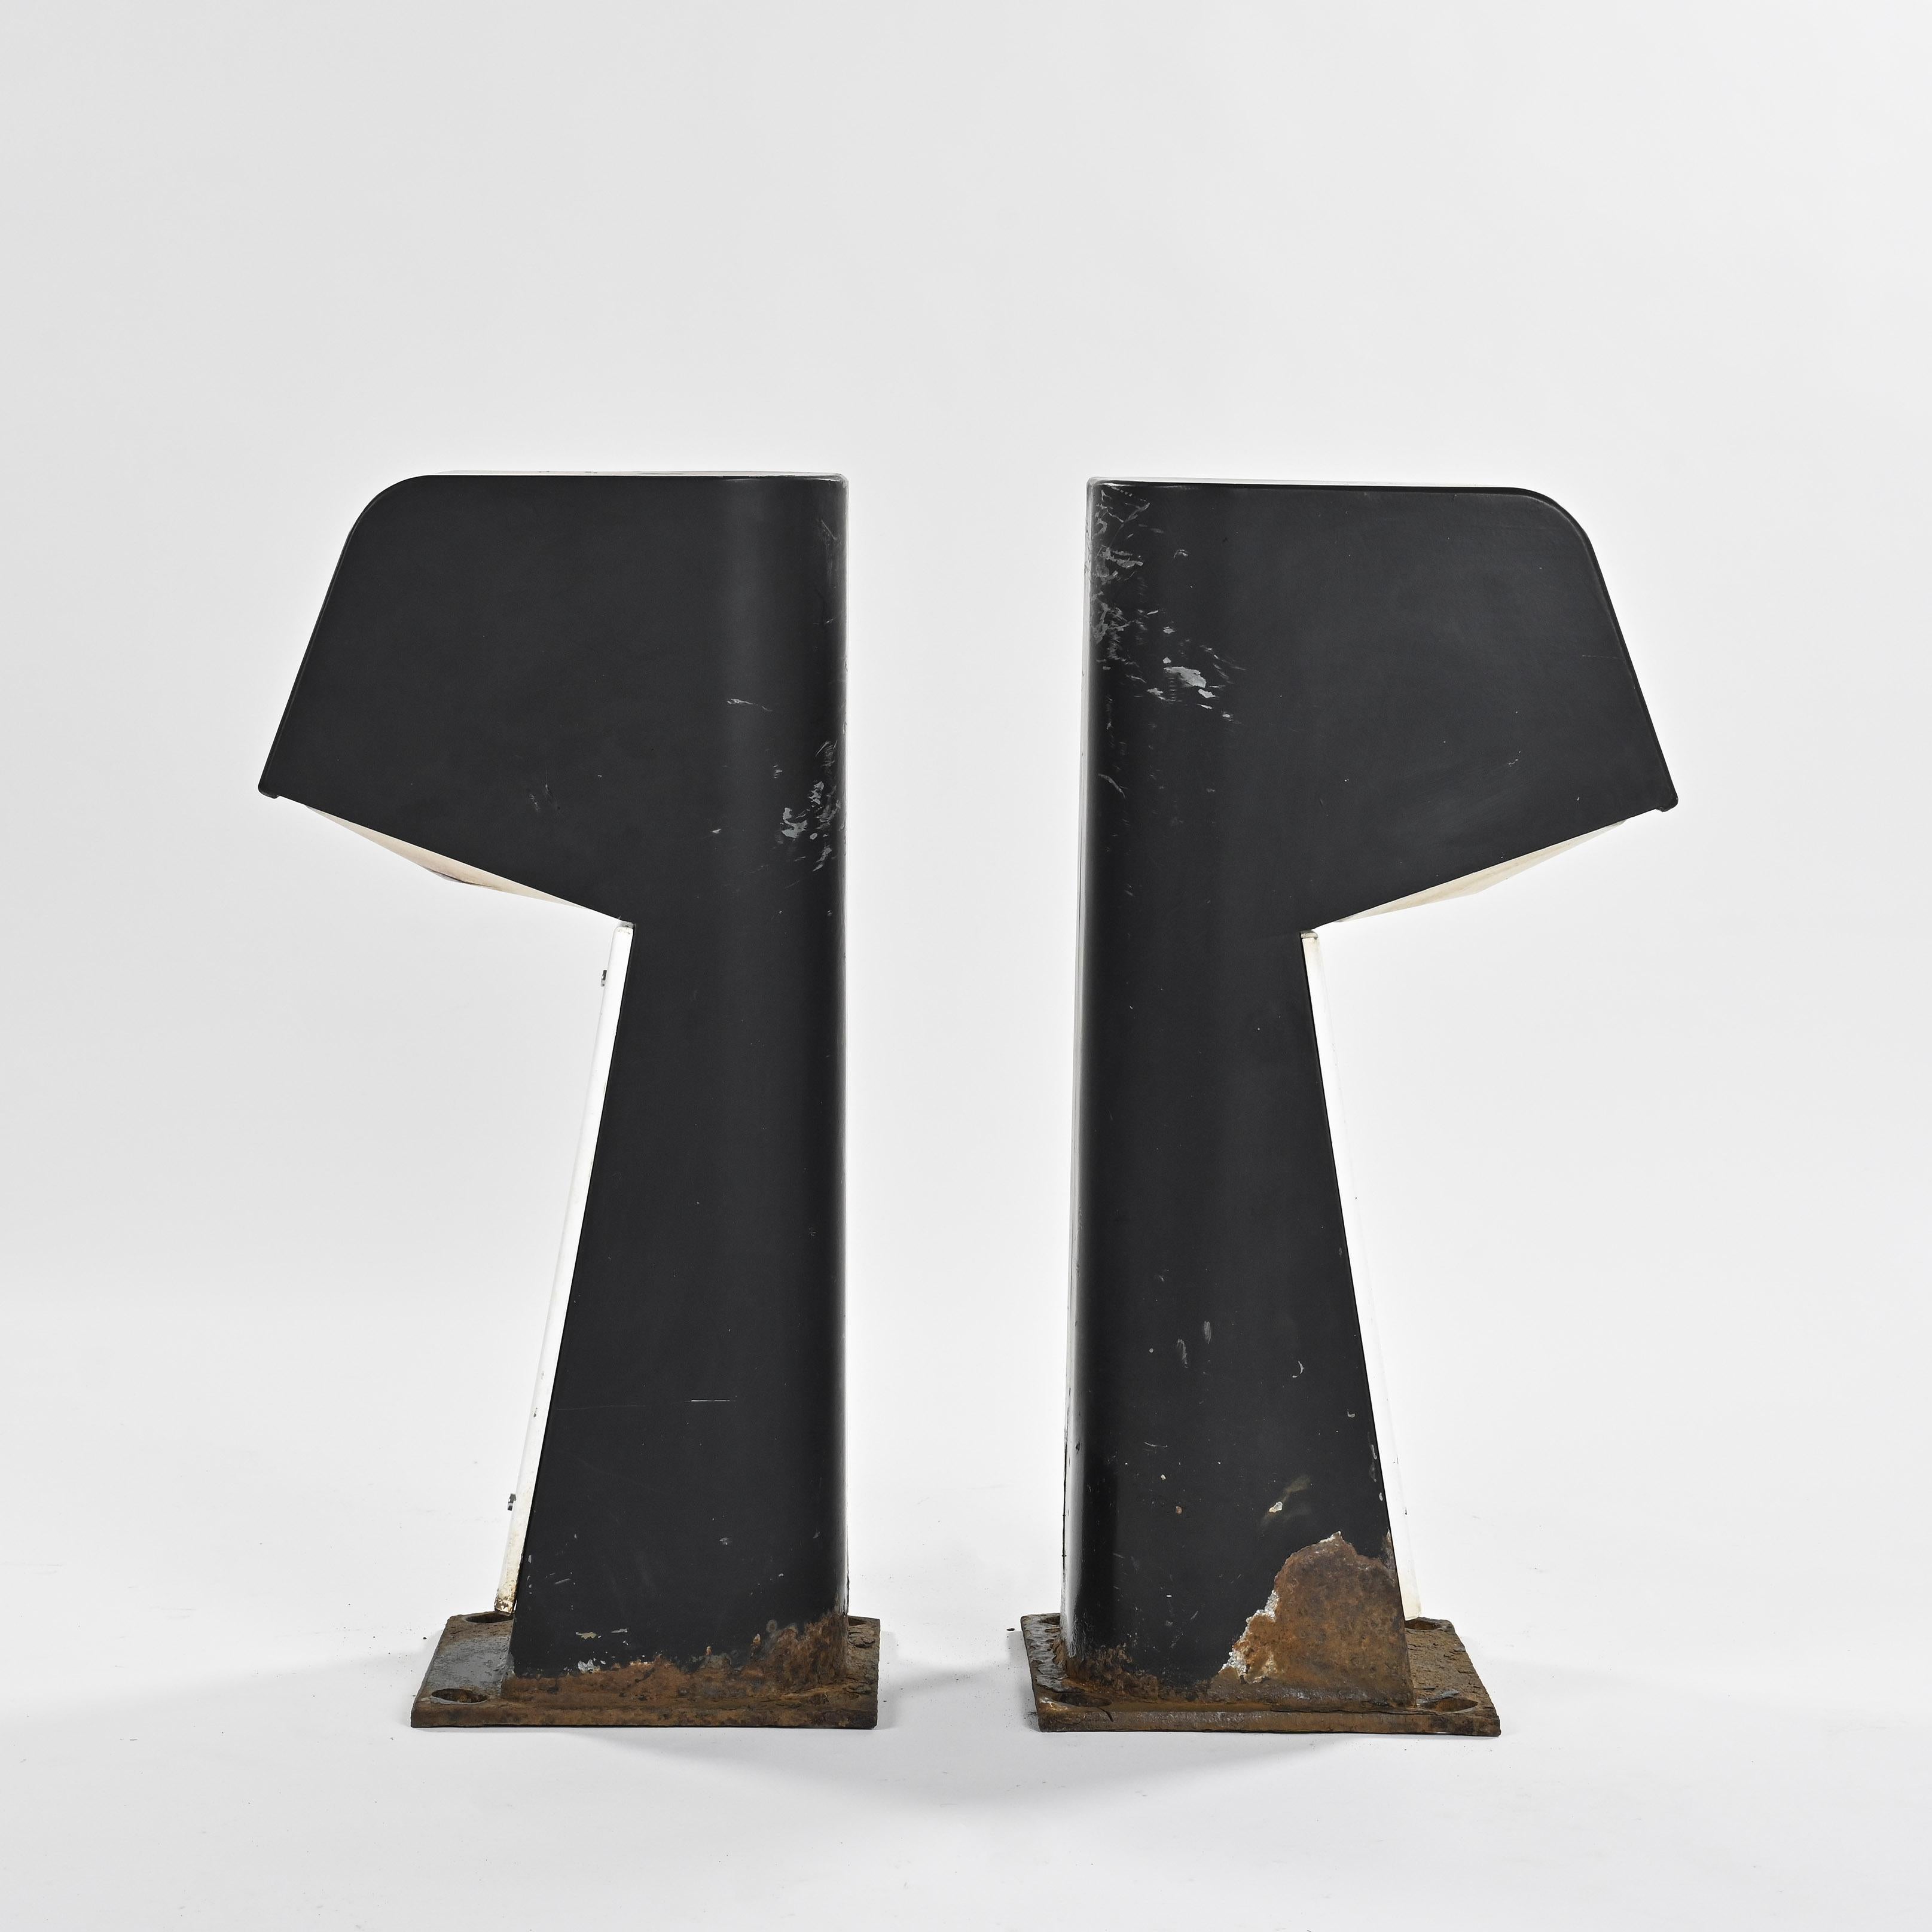 A rare pair of lighting terminals, known as Blind Bollards (BB), designed by French architect Jean Balladur. 

The structure is made of black lacquered folded steel housing a glass diffuser, resting on a square base

Provenance: La Grande-Motte,